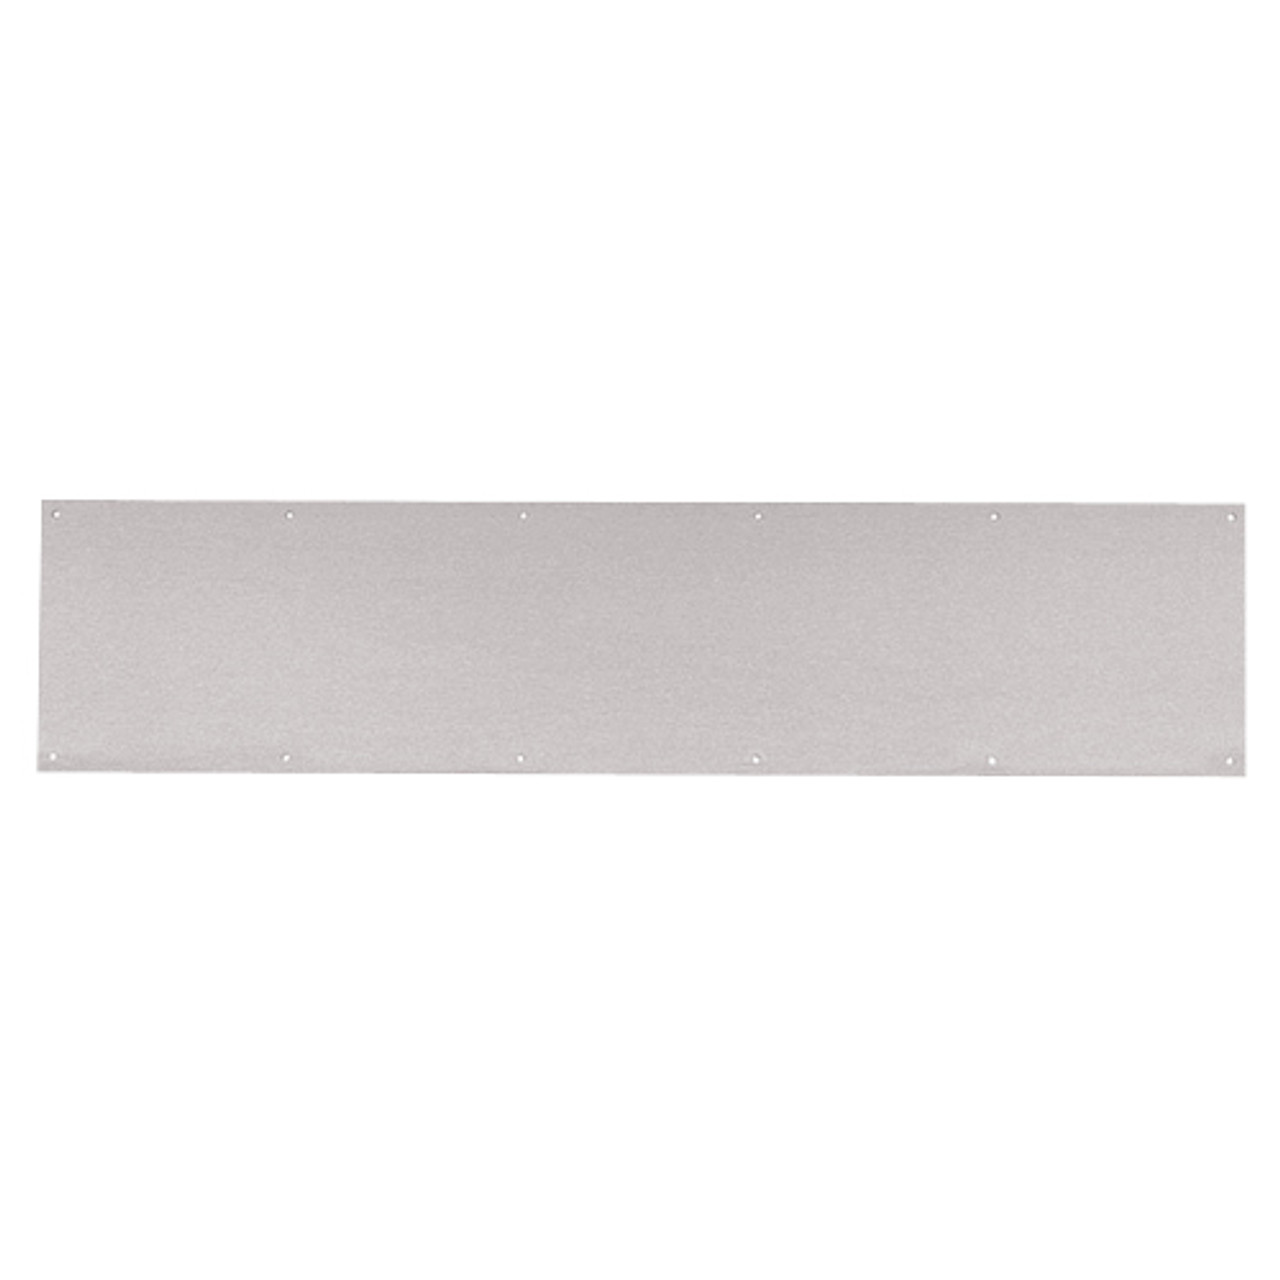 8400-US32D-10x23-B-CS Ives 8400 Series Protection Plate in Satin Stainless Steel